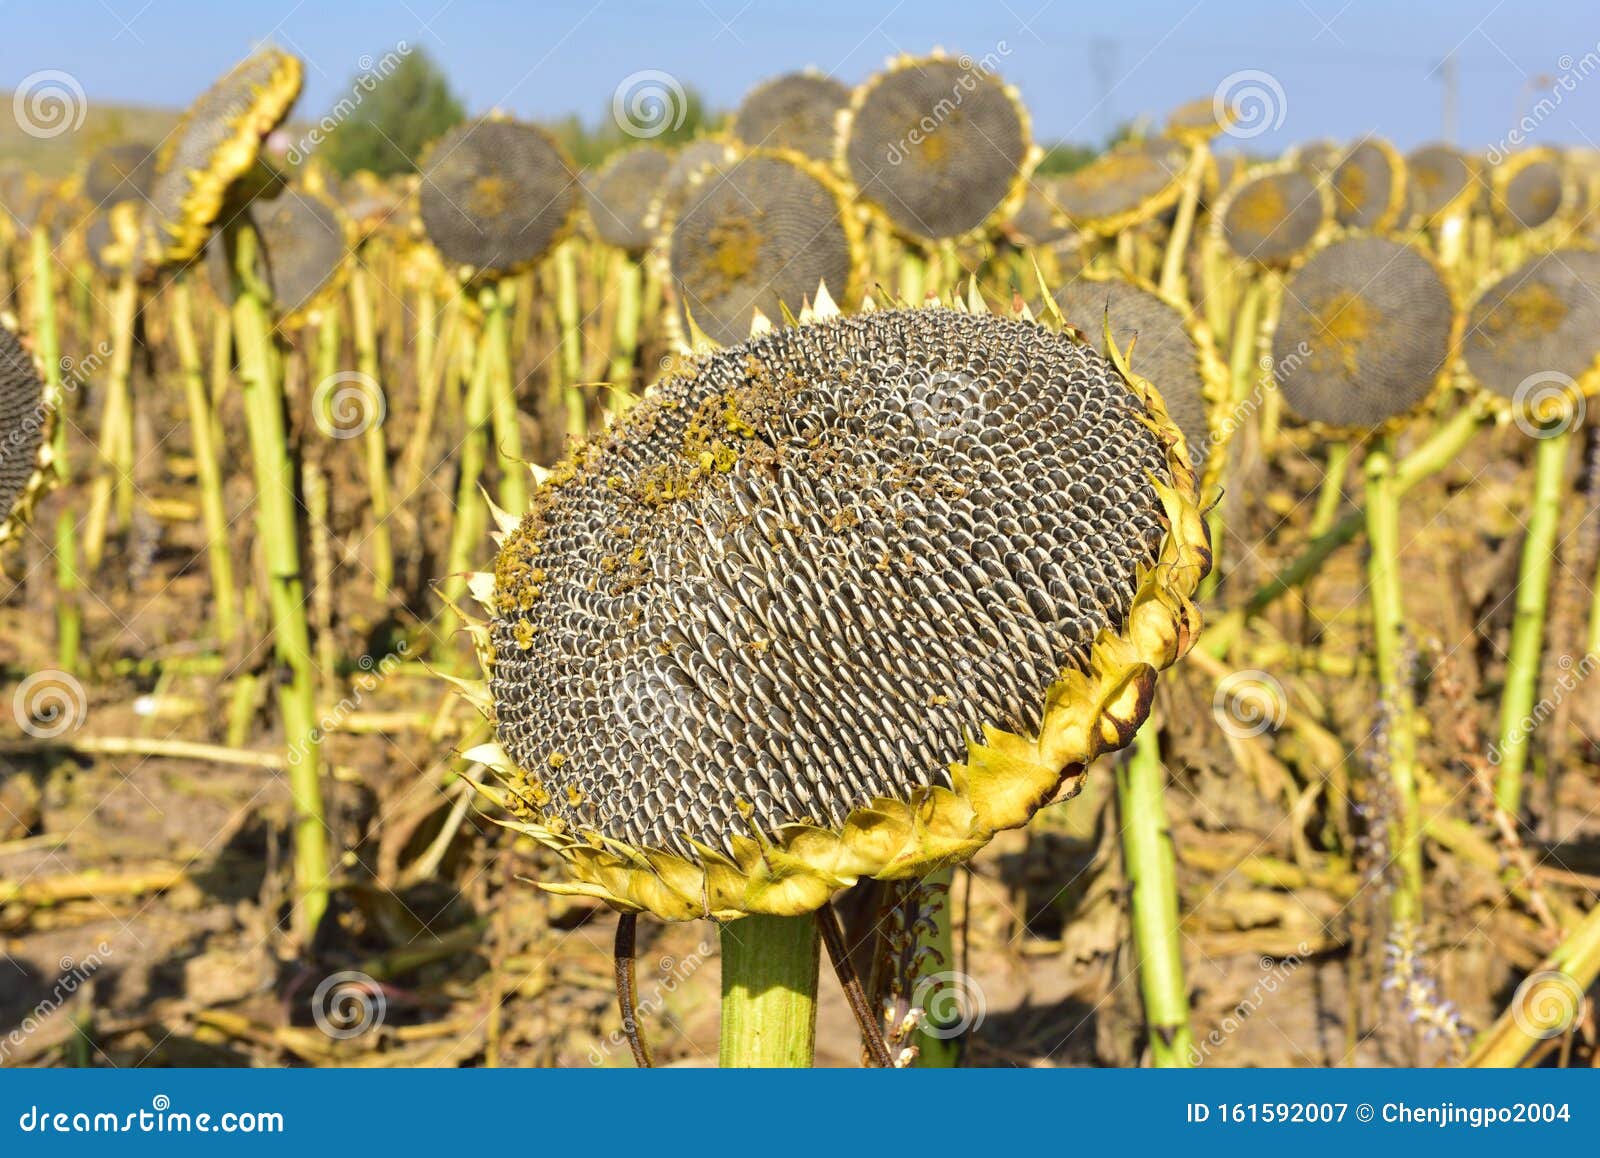 Mature sunflower seeds stock image. Image of shell, extract - 161592007